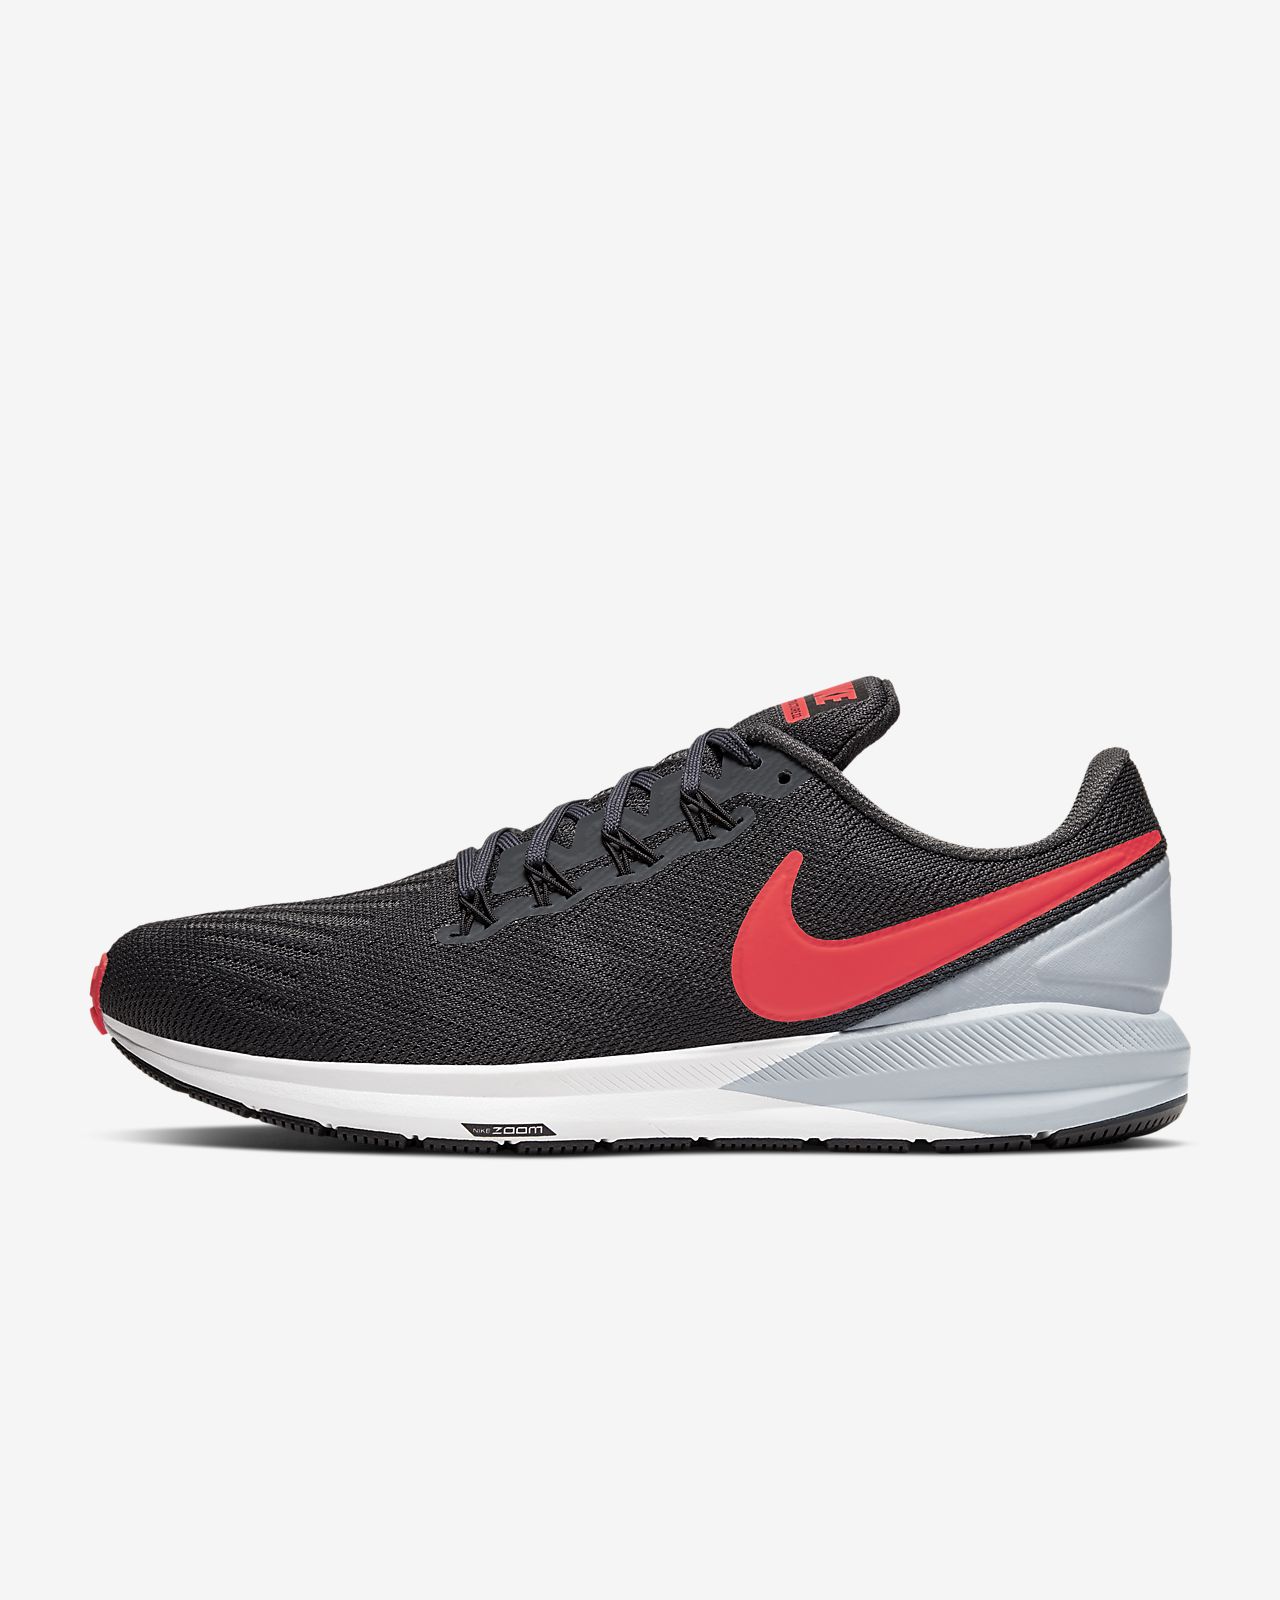 nike zoom structure 16 men's